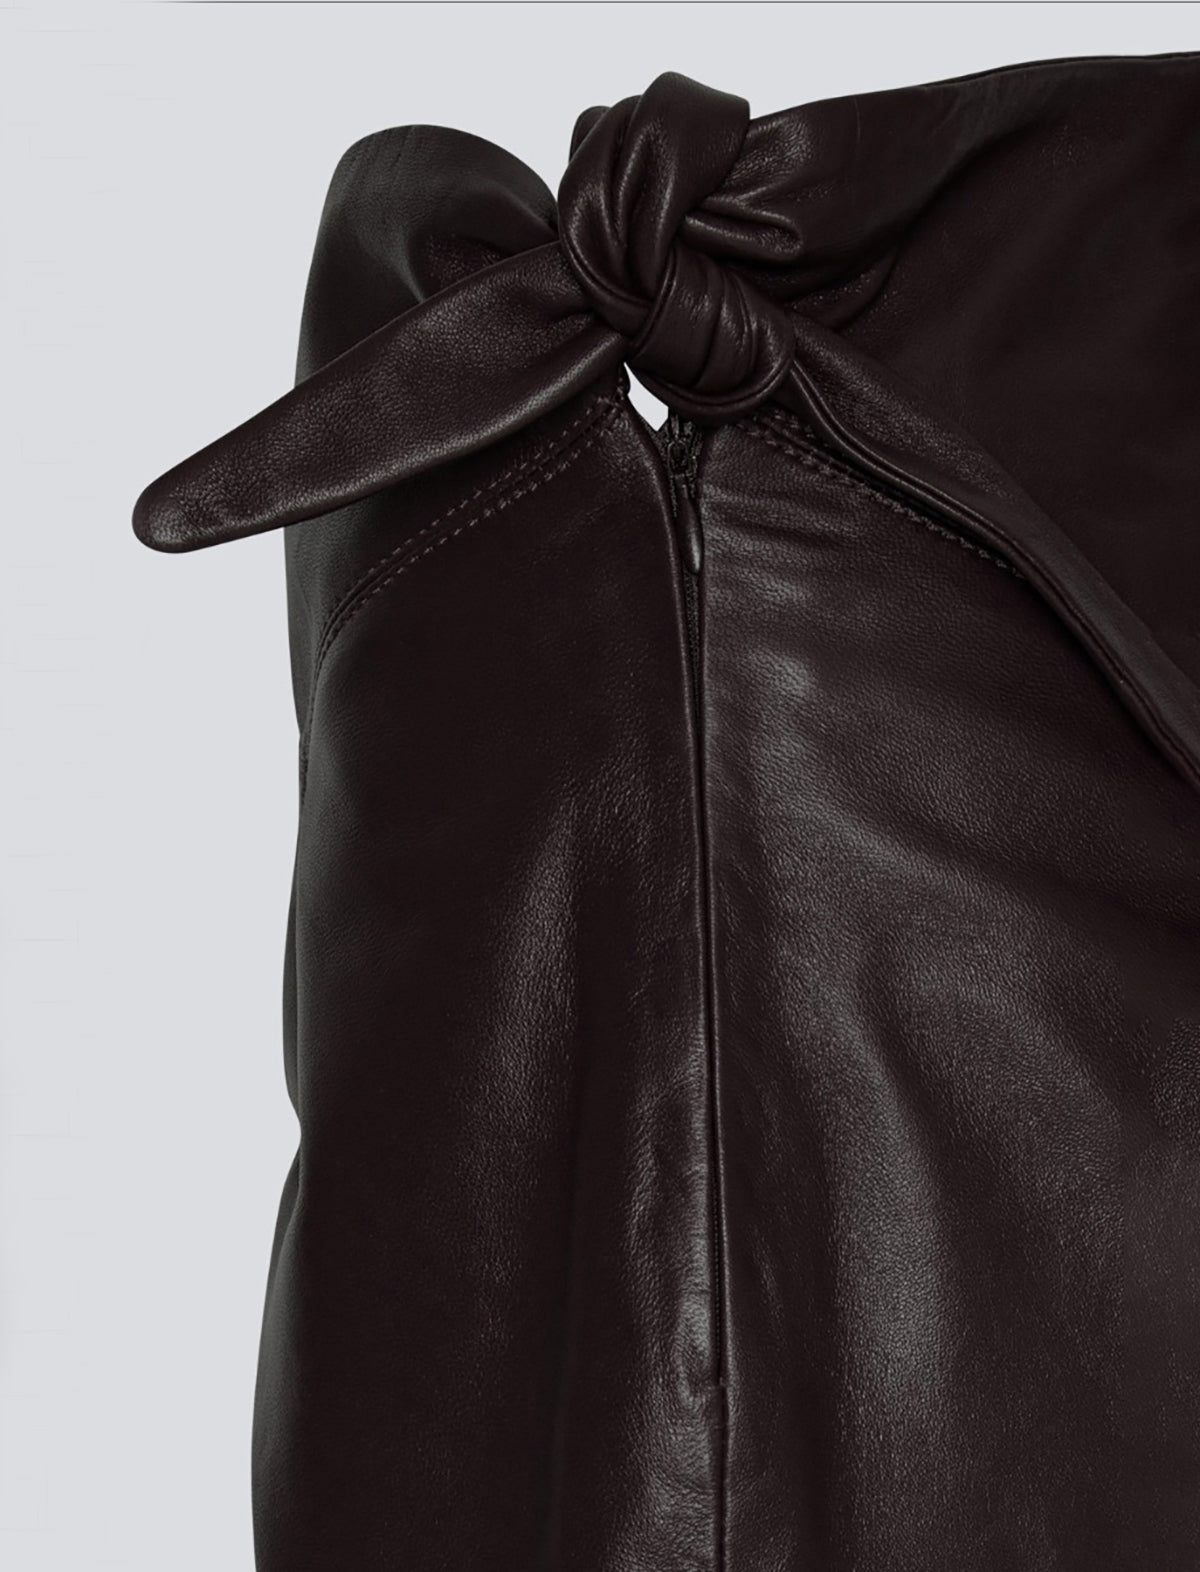 REMAIN Cutline Leather Skirt in Chocolate Plum